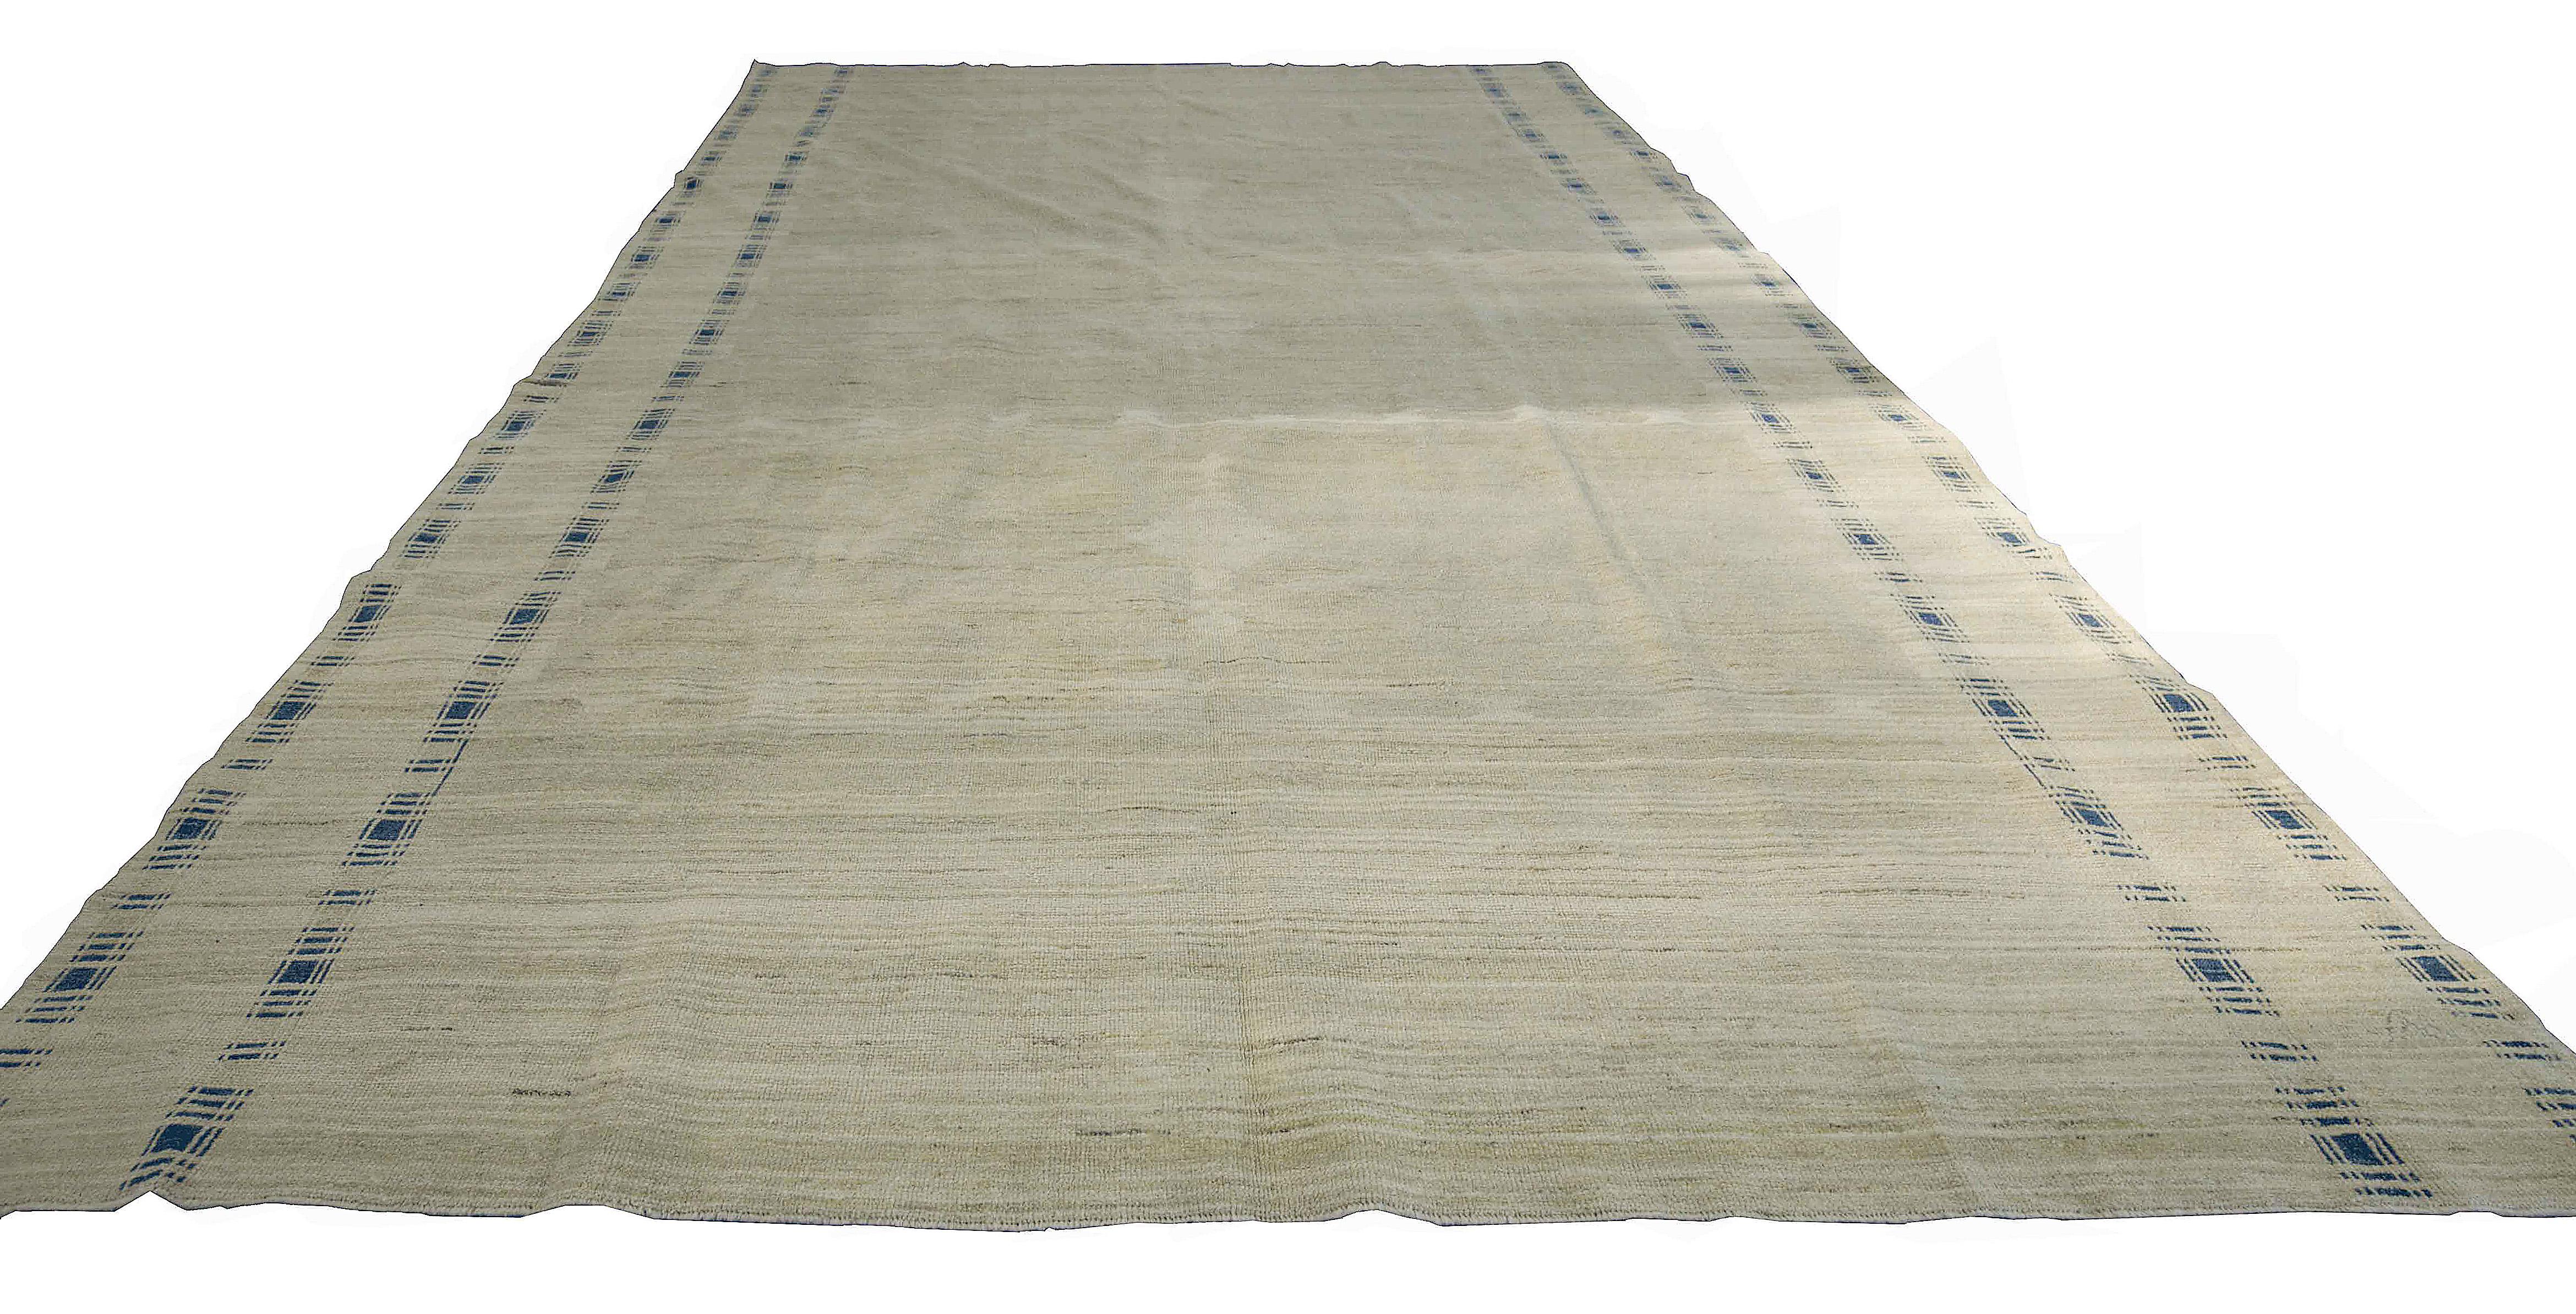 Contemporary Turkish rug made of handwoven sheep’s wool of the finest quality. It’s colored with organic vegetable dyes that are certified safe for humans and pets alike. It features a gorgeous beige field with medallion details in white and has a